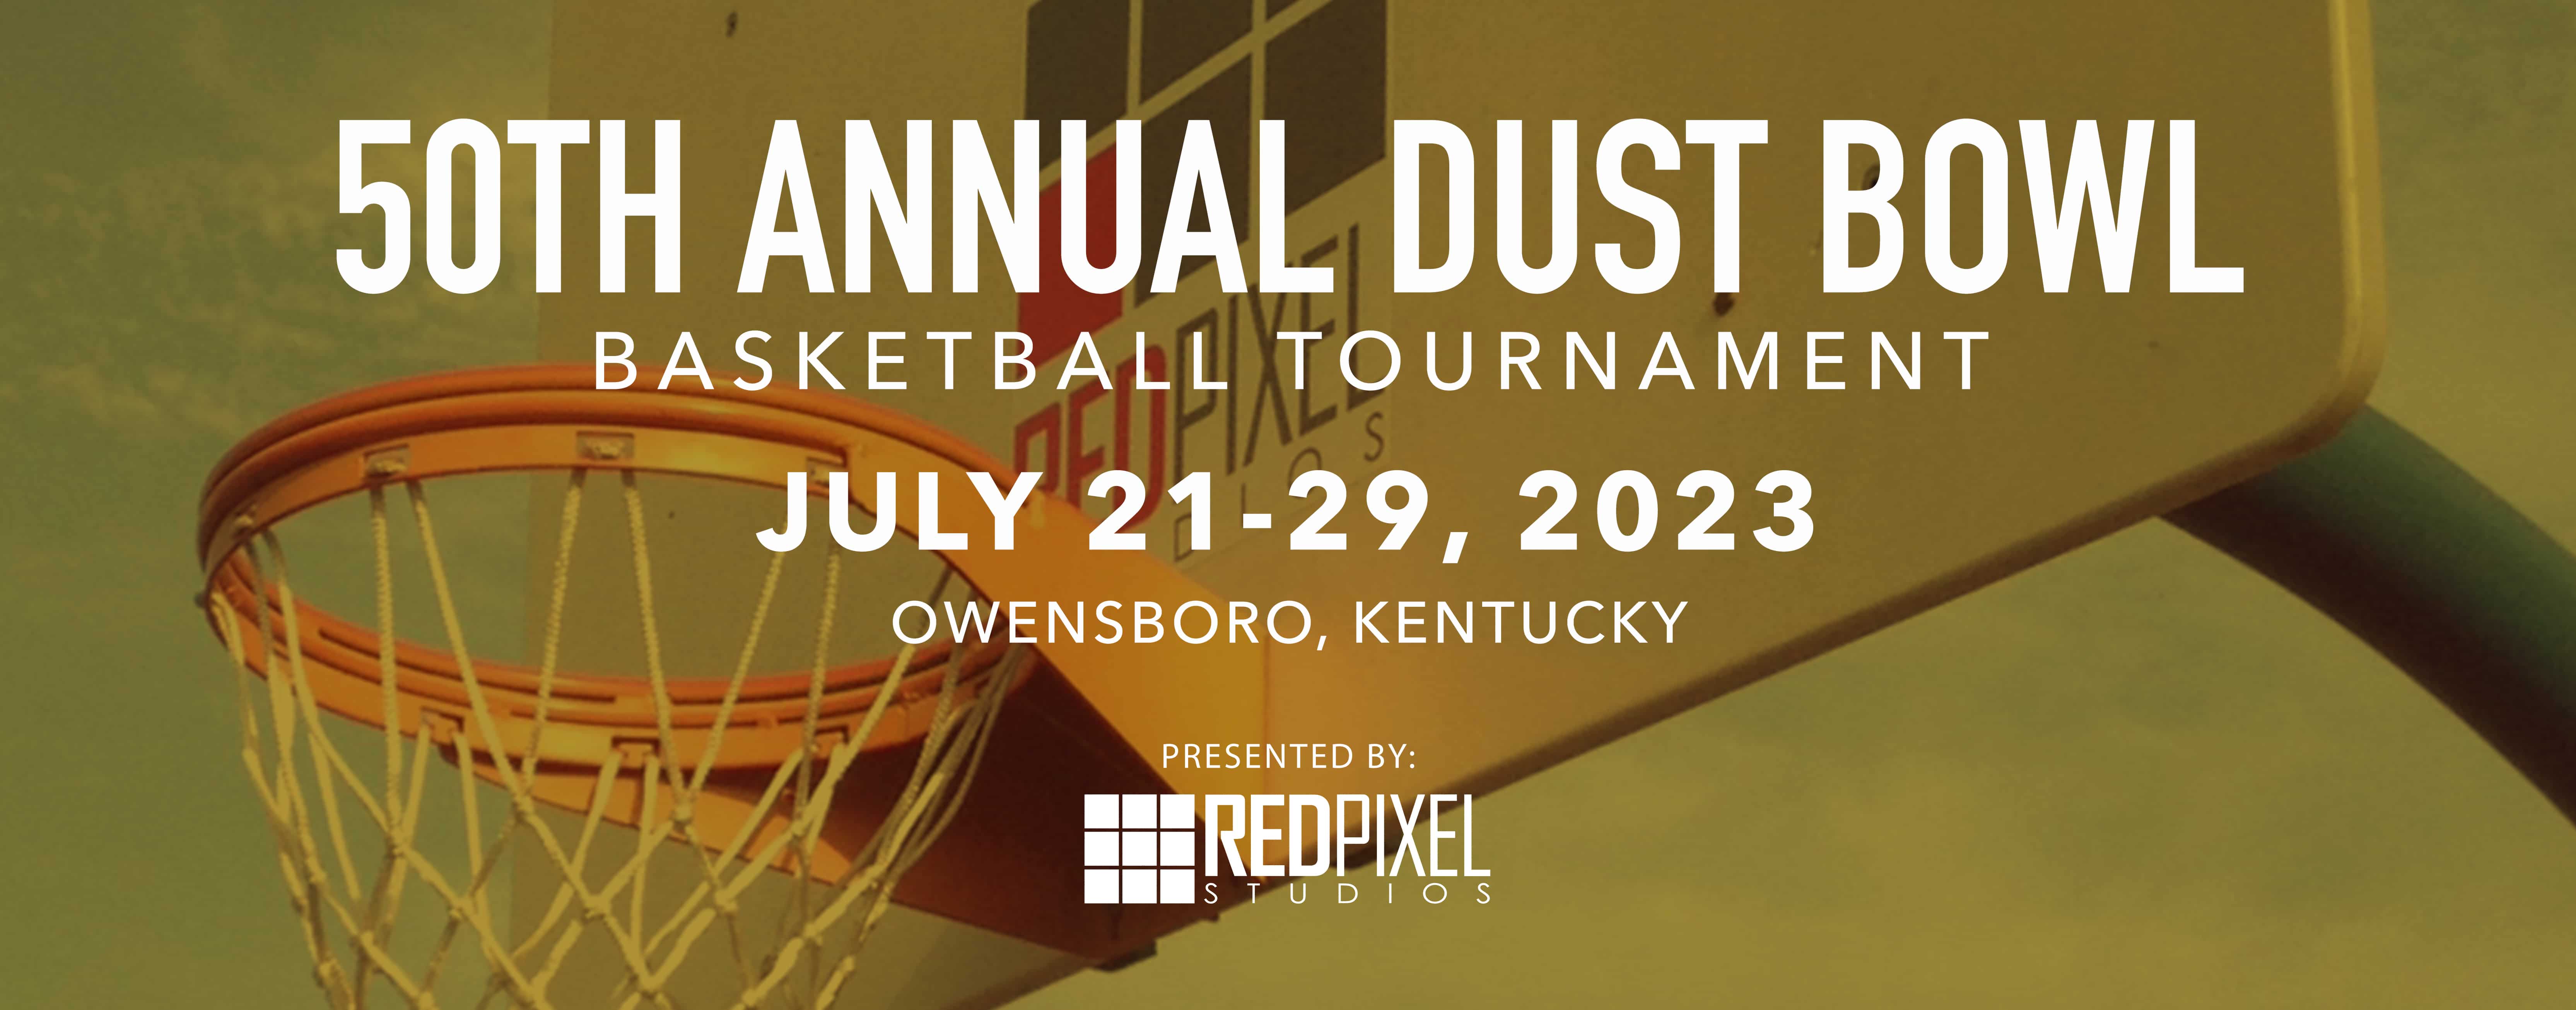 49th Annual Dust Bowl - July 15-23, 2022